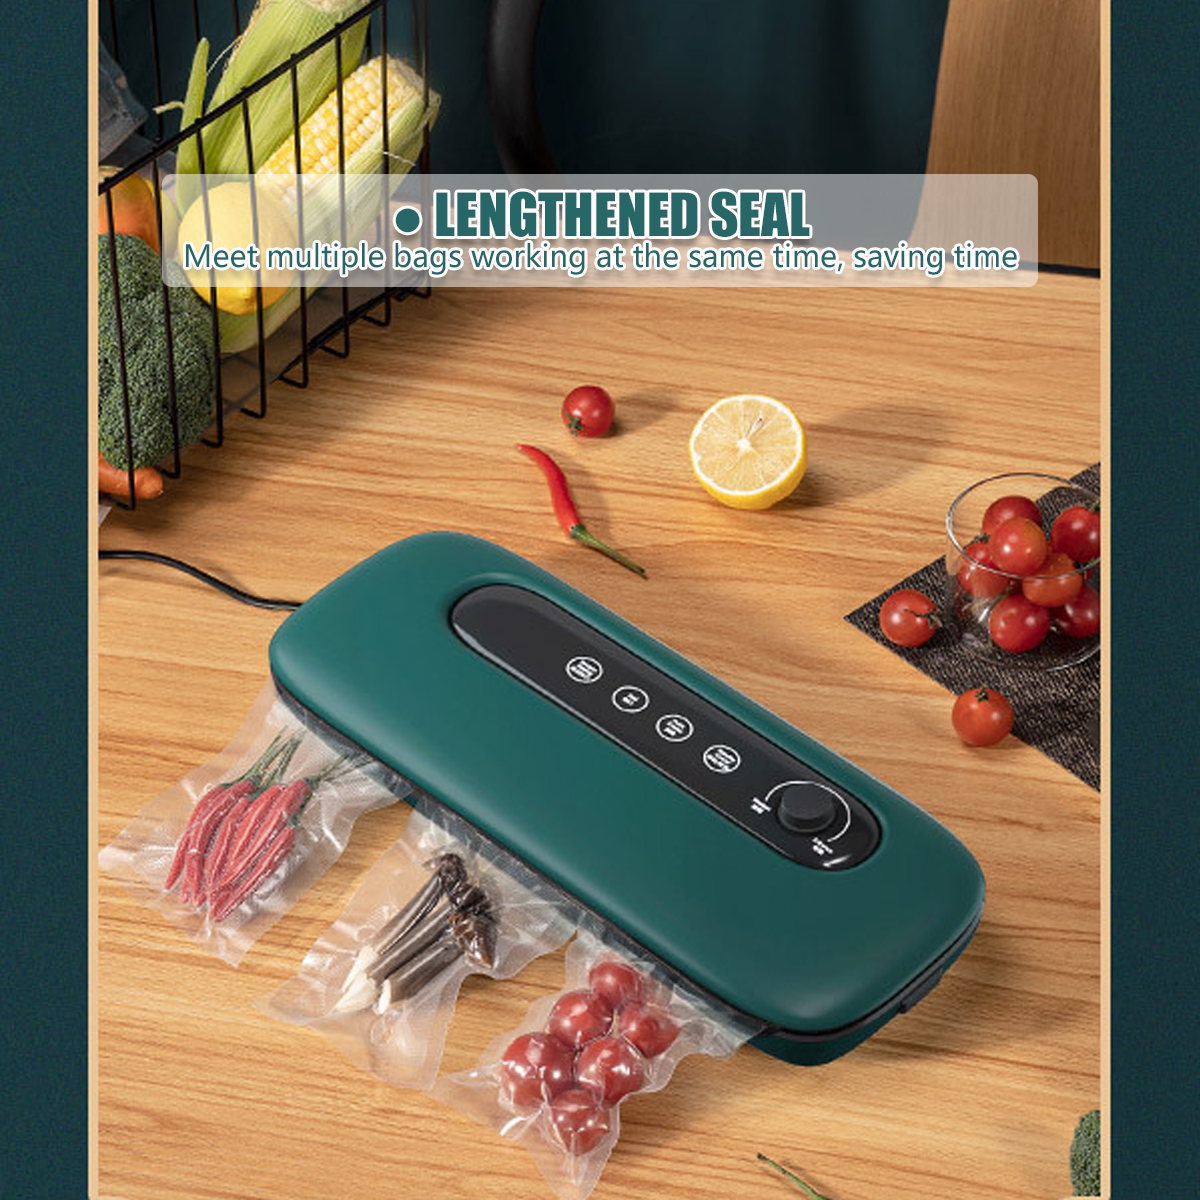 Vacuum-Sealer-Machine-Full-Automatic-Food-Sealer-Air-Sealing-System-for-Food-Storage-3-Functions-Ove-1928369-7